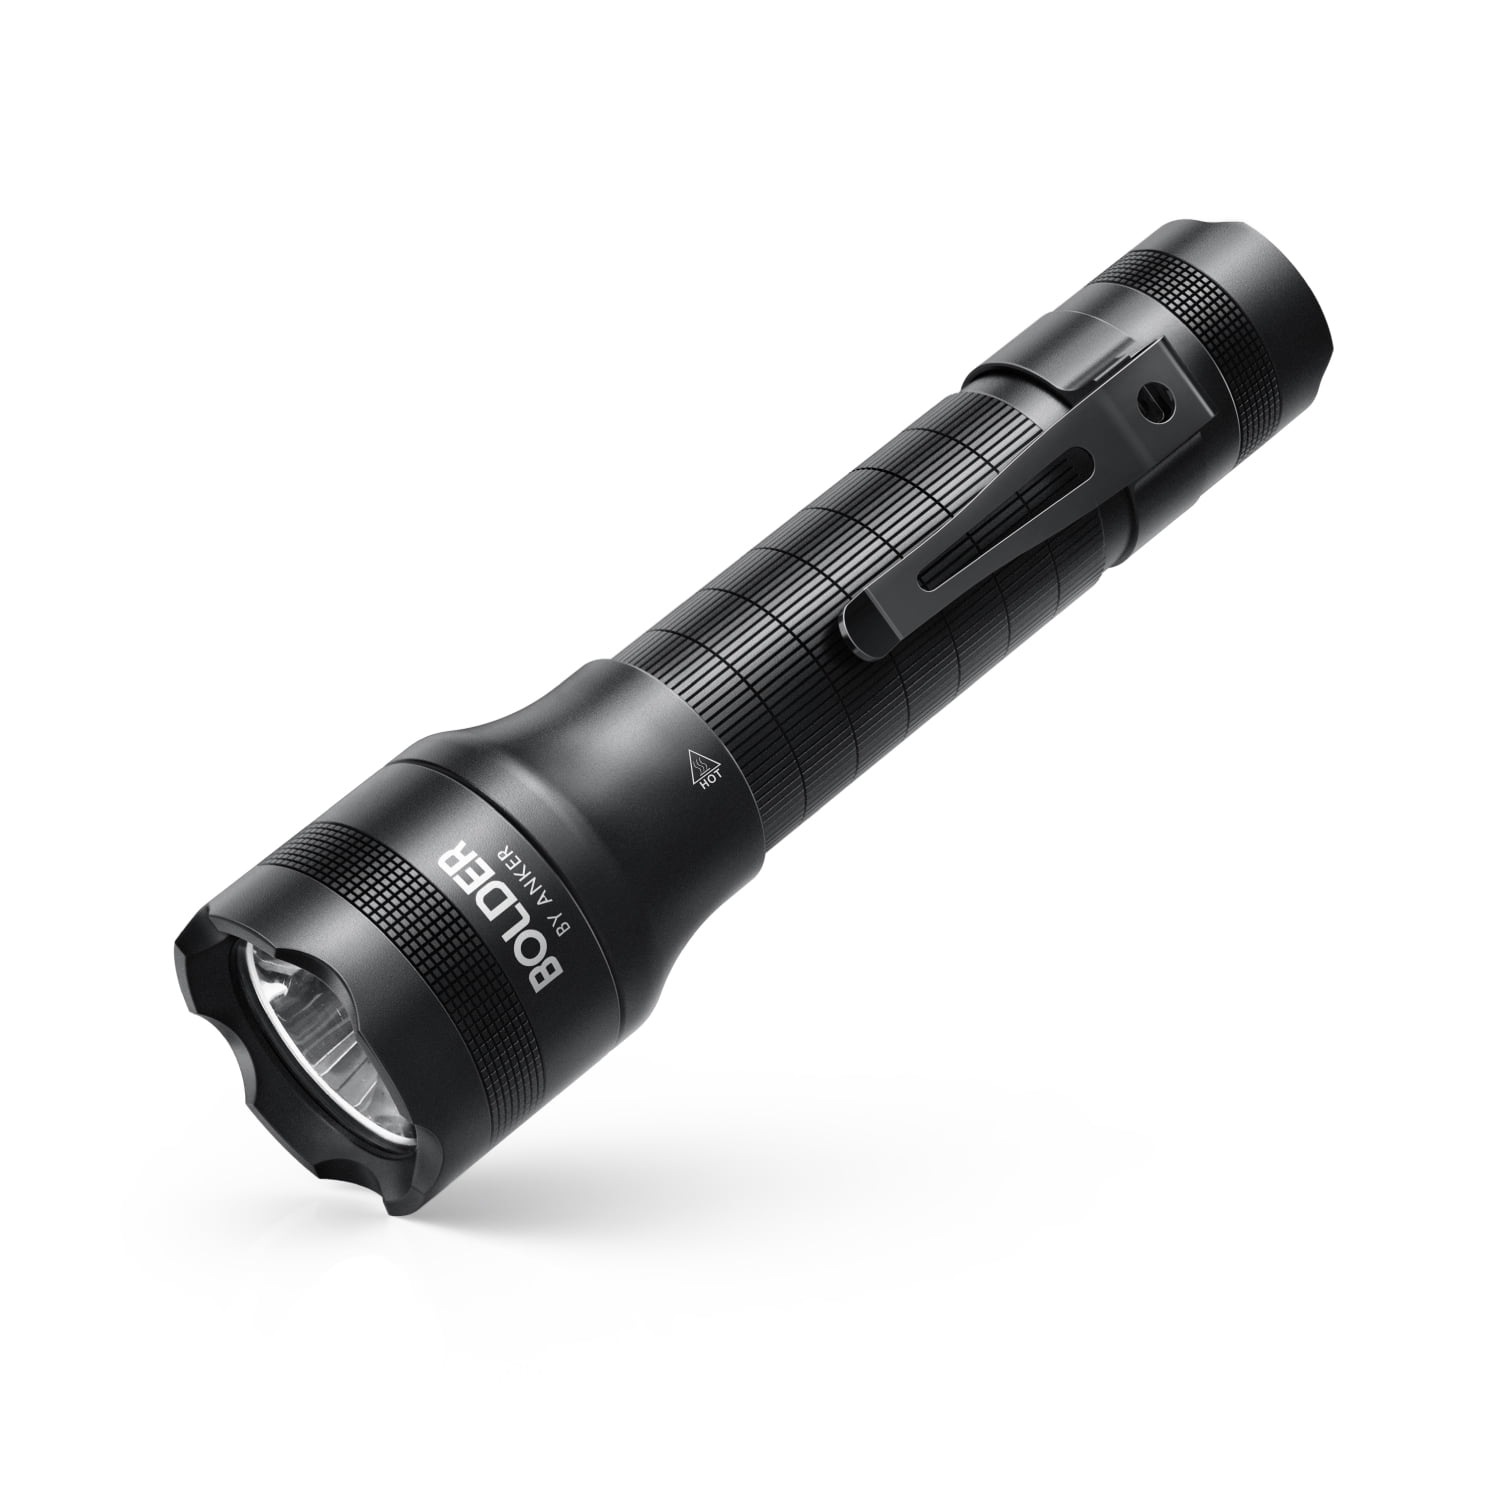 Details about   Zoomable 350000Lumens 5-Mode High Power  LED Flashlight Lamp Torch  Black 